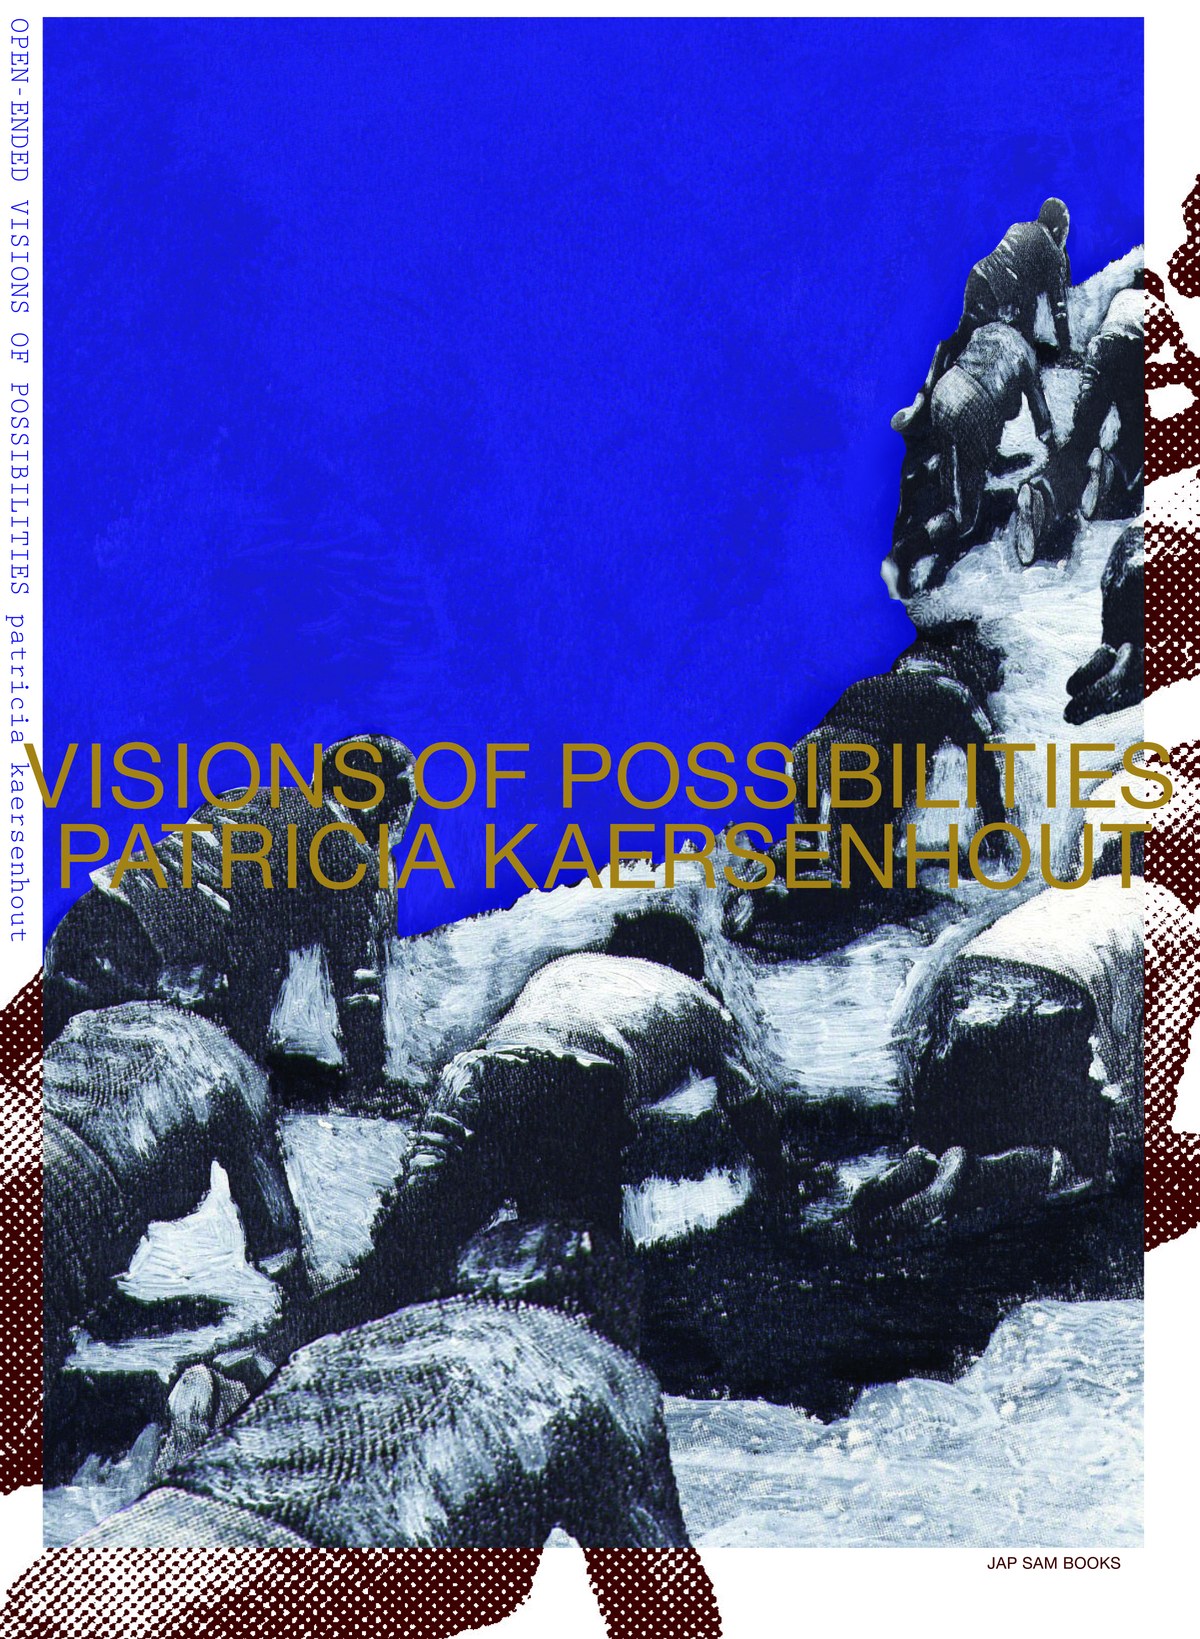 patricia kaersenhout: Visions of Possibilities